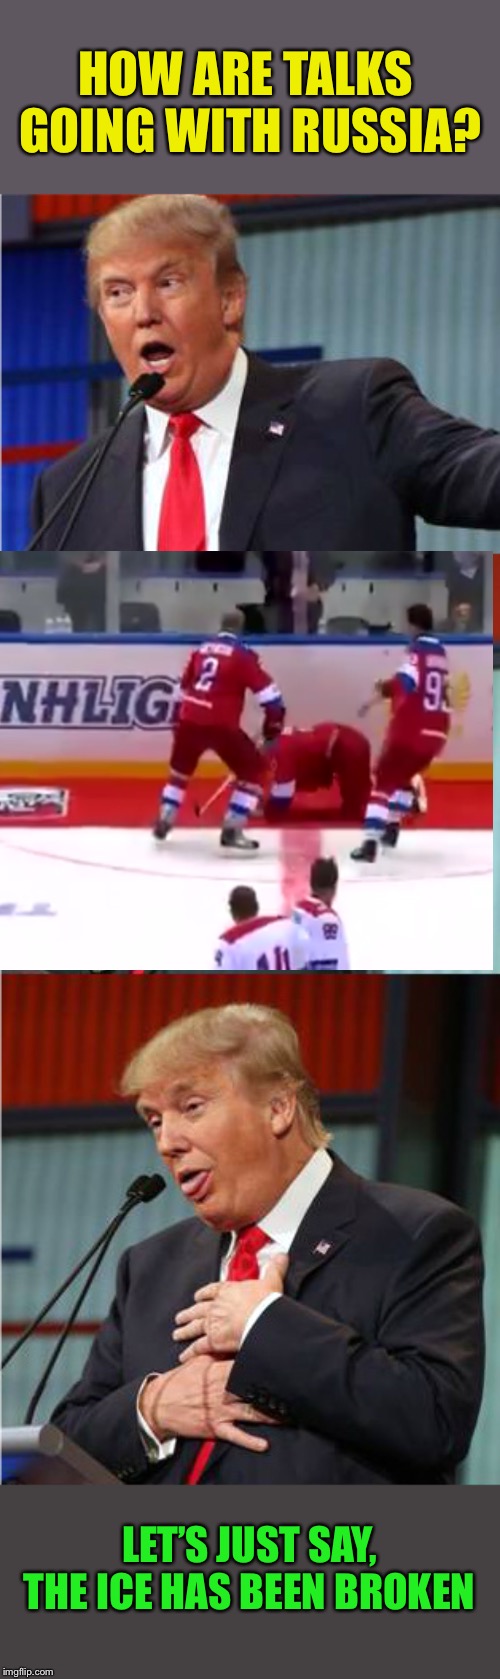 Putin on ice | HOW ARE TALKS GOING WITH RUSSIA? LET’S JUST SAY, THE ICE HAS BEEN BROKEN | image tagged in bad pun trump,putin falls | made w/ Imgflip meme maker